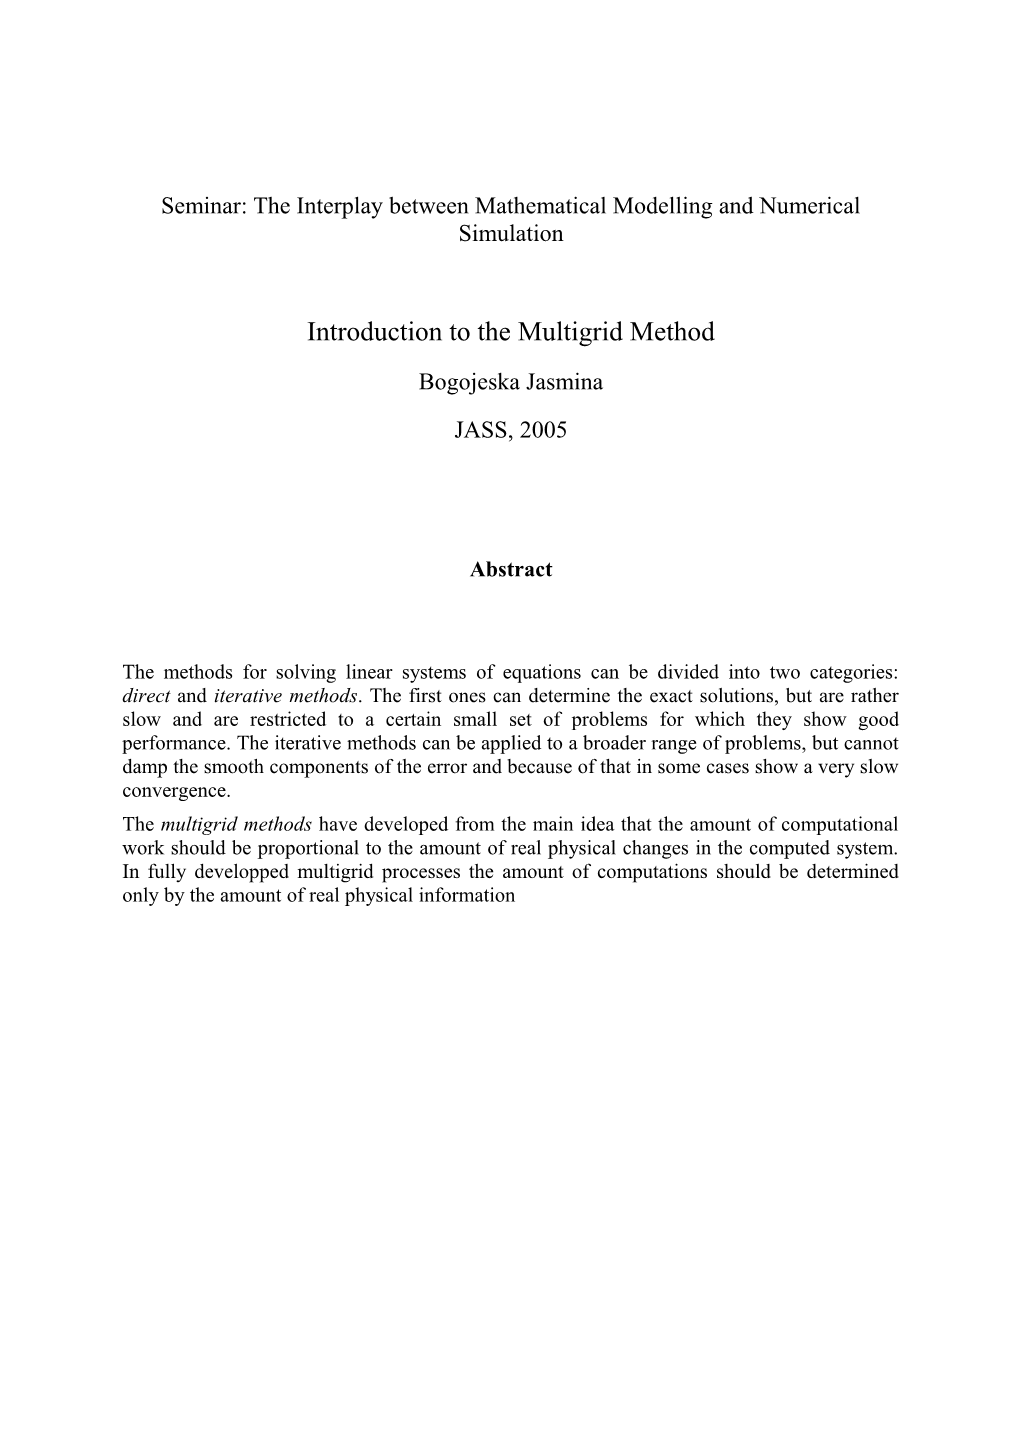 Seminar: the Interplay Between Mathematical Modelling and Numerical Simulation